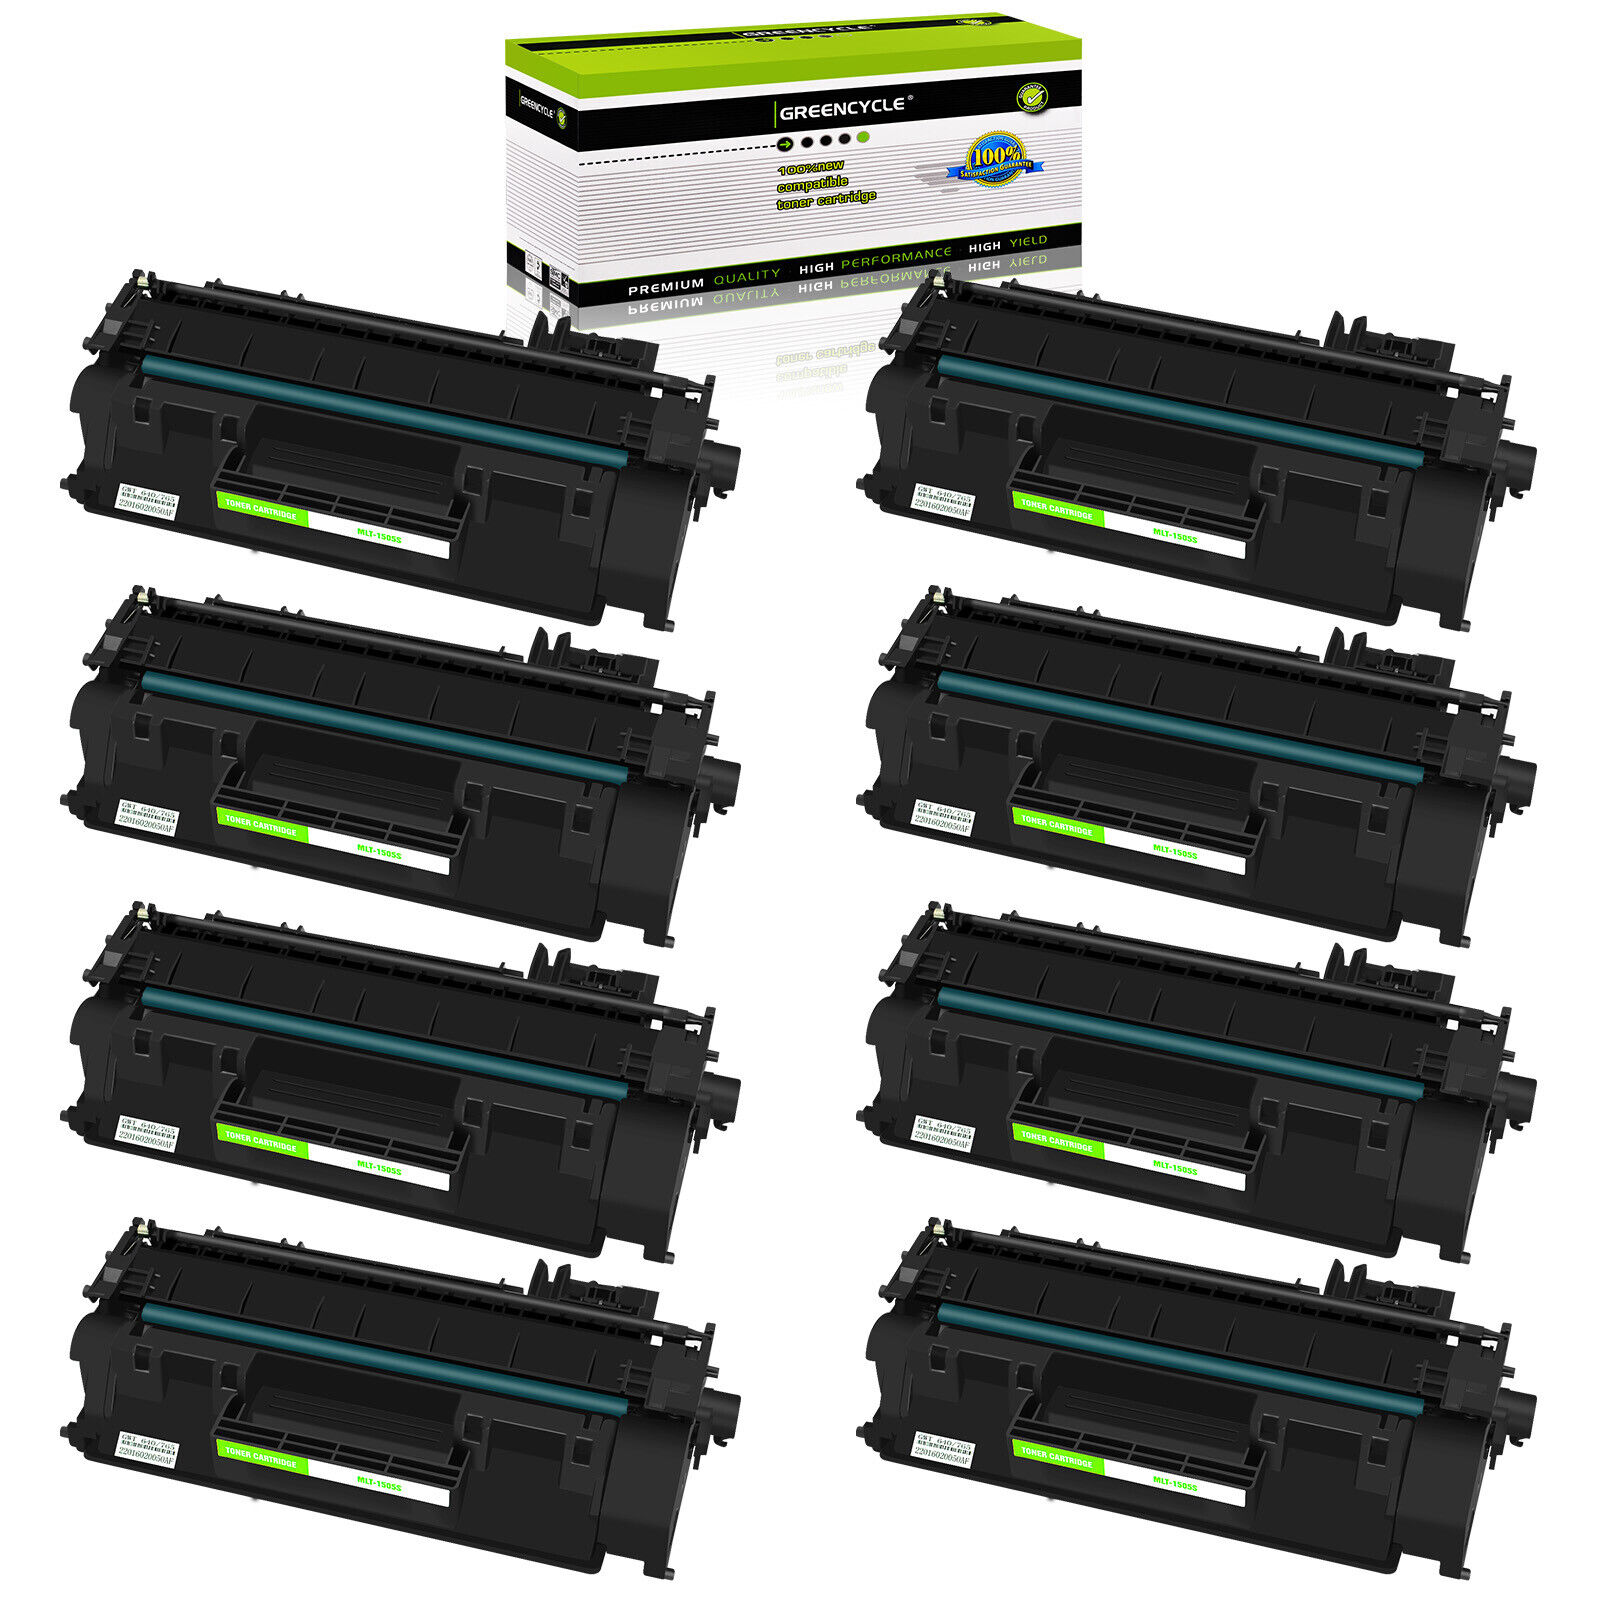 GREENCYCLE 8 Pack CE505A 05A Toner for HP LaserJet P2030 P2035 P2035n Printer